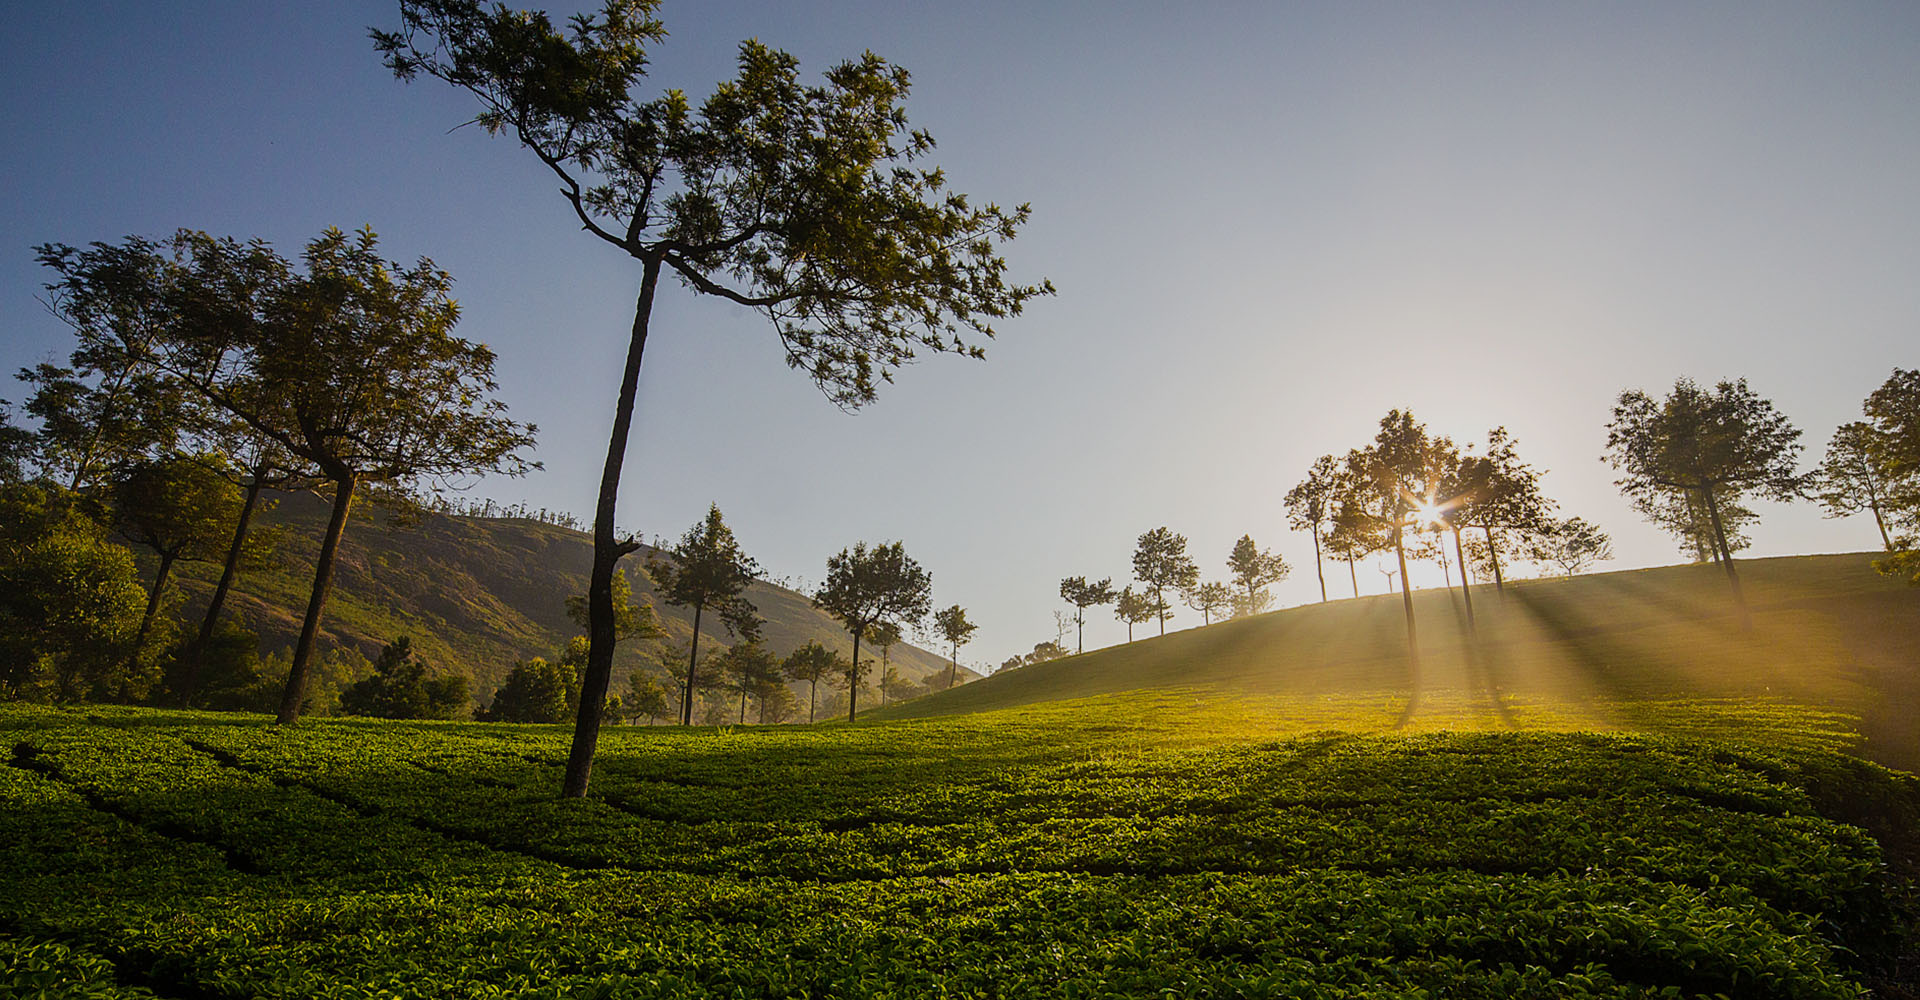 Munnar – Of Misty Mountains and Tea Trails